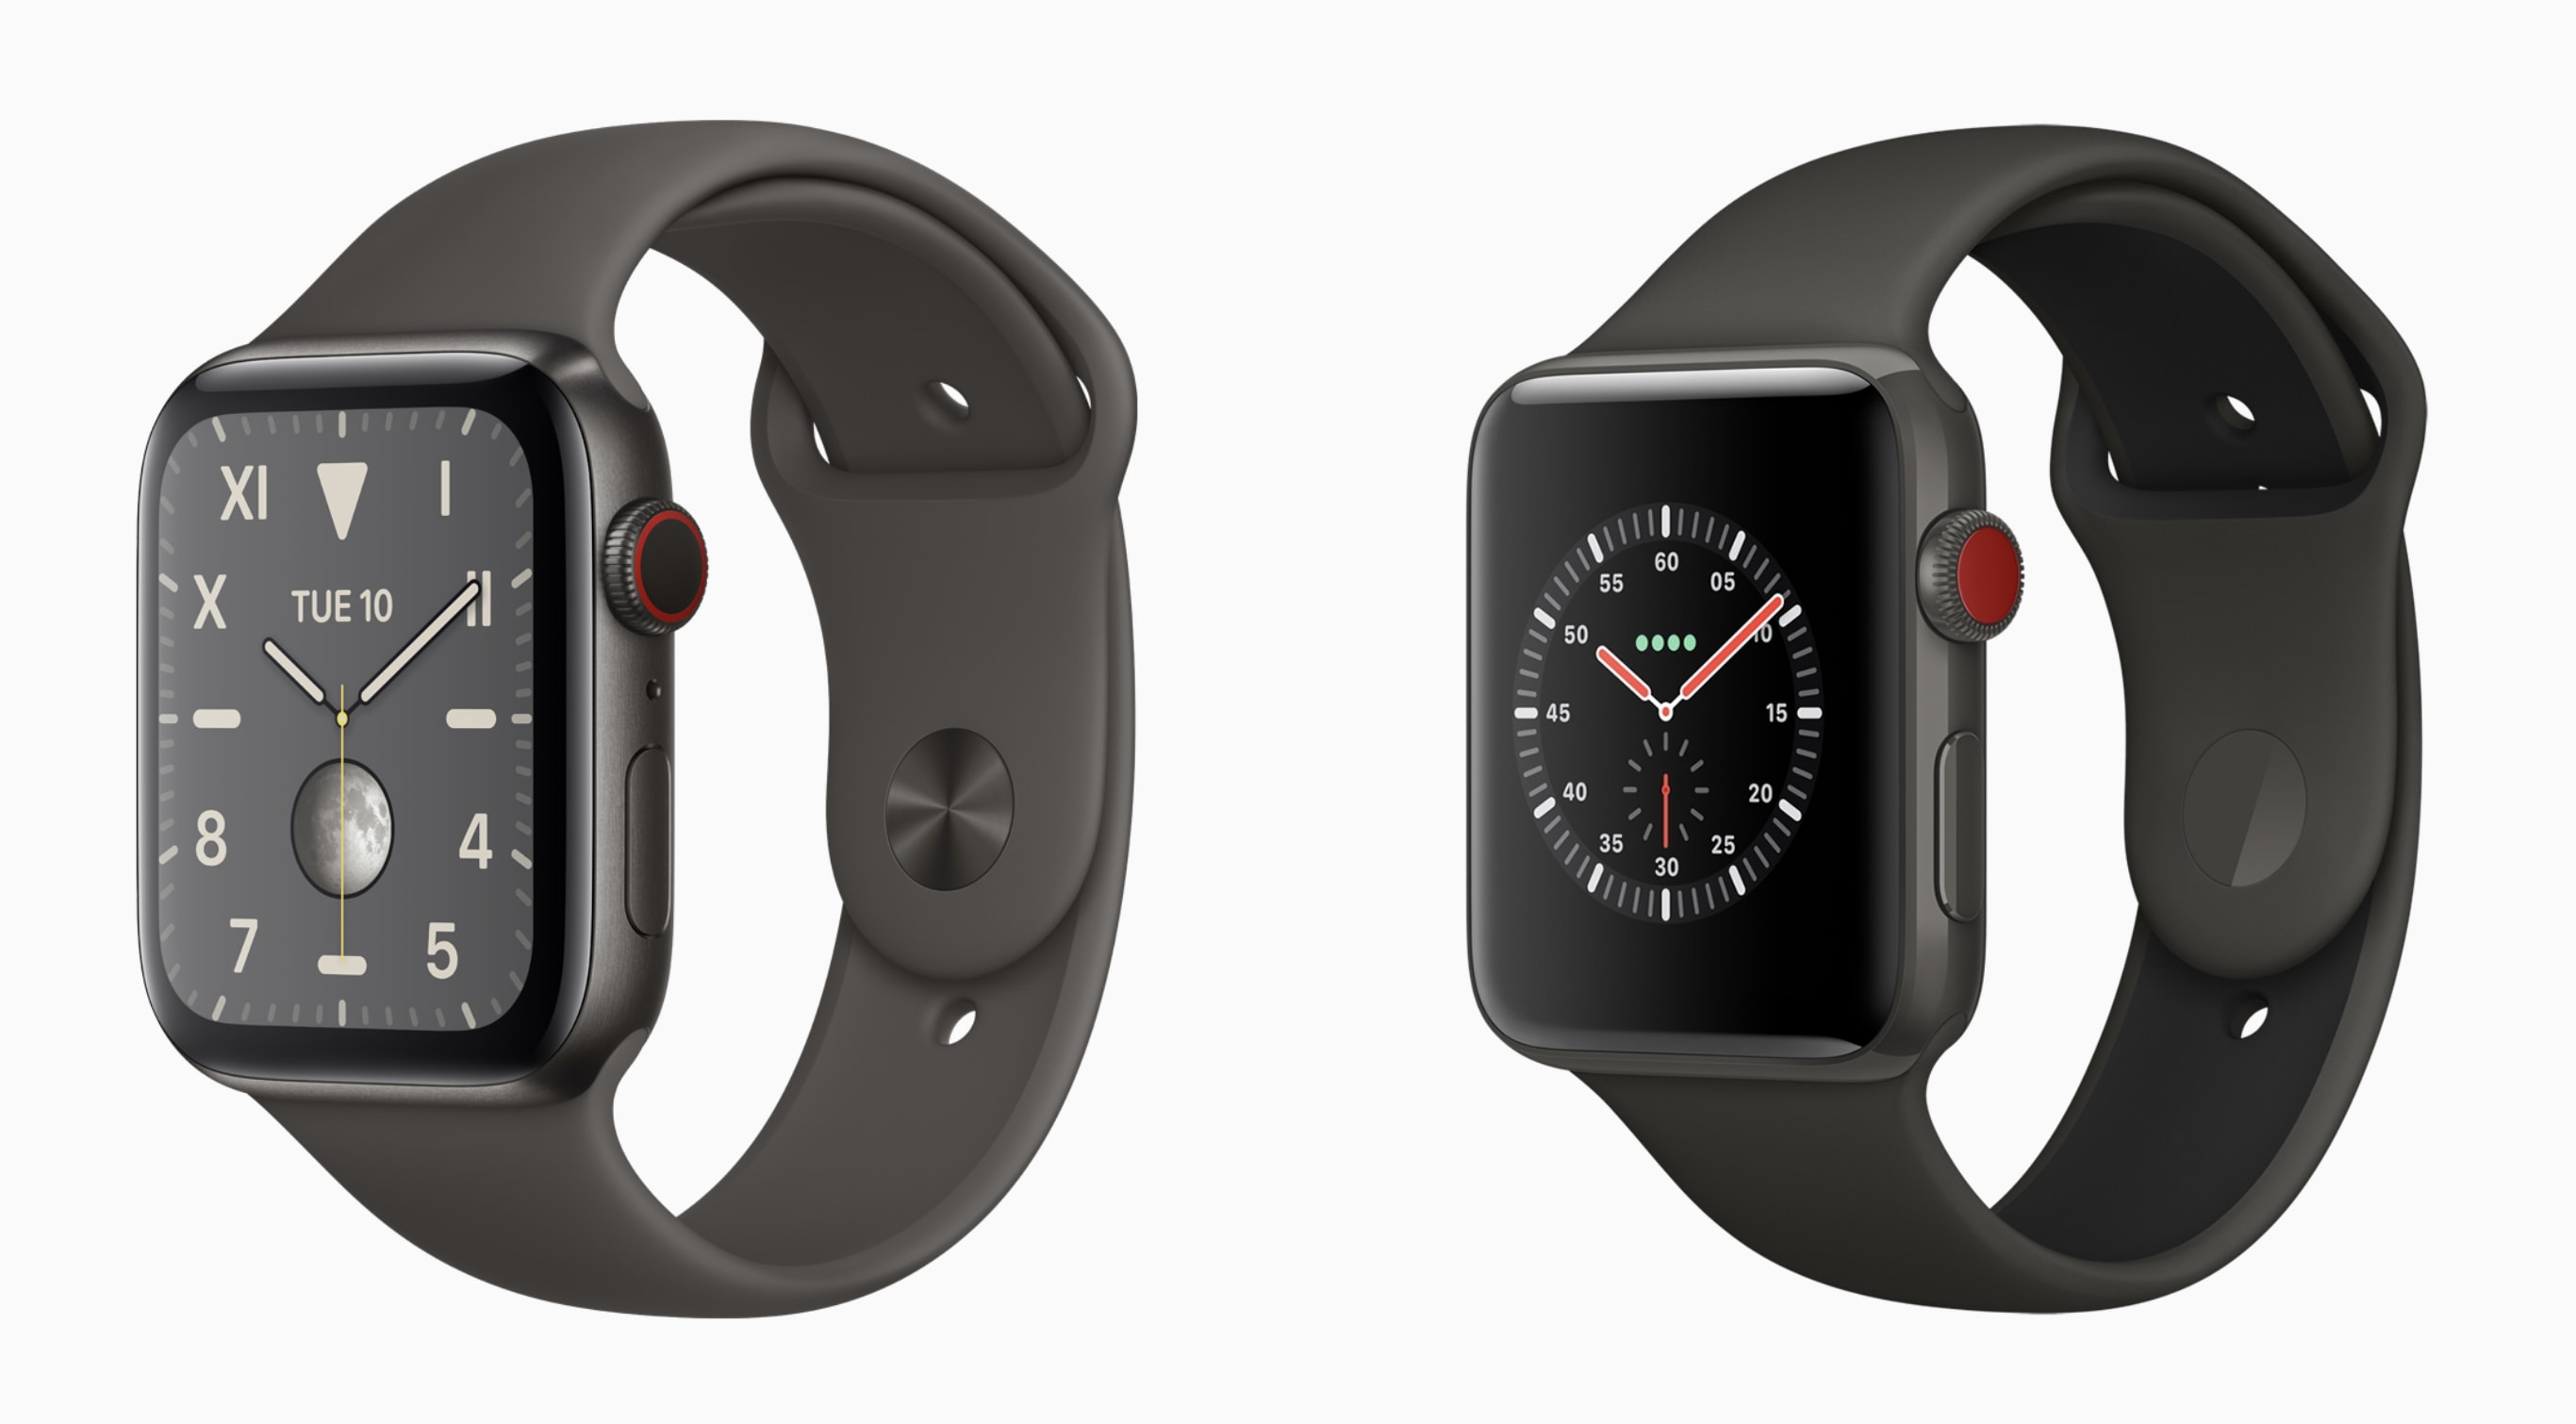 Apple Watch Series 5 vs. Series 3: Which one should you buy?